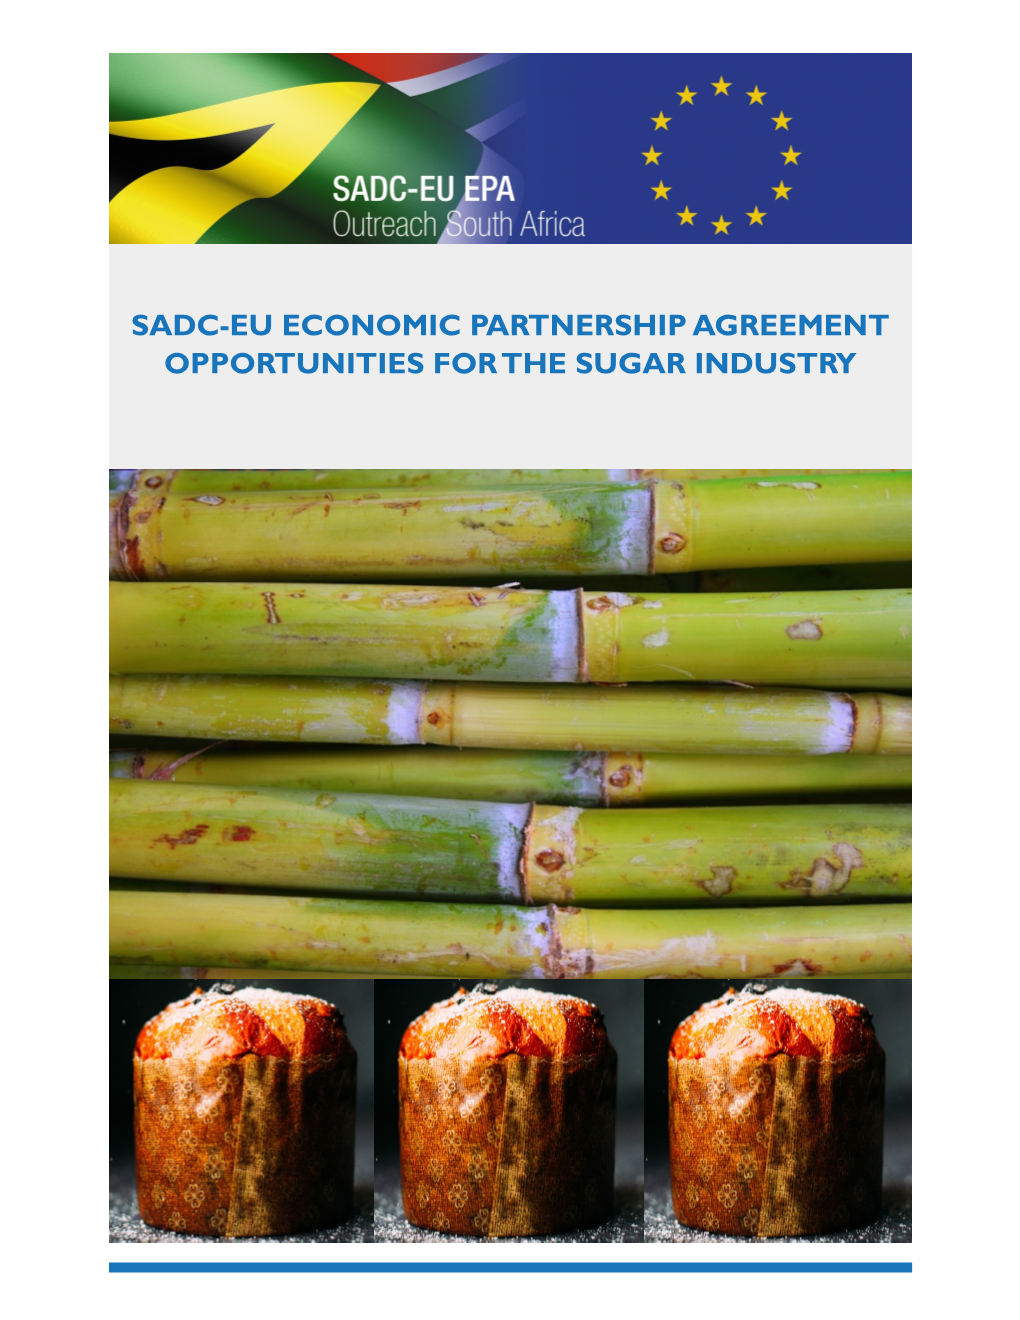 Sadc-Eu Economic Partnership Agreement Opportunities for the Sugar Industry